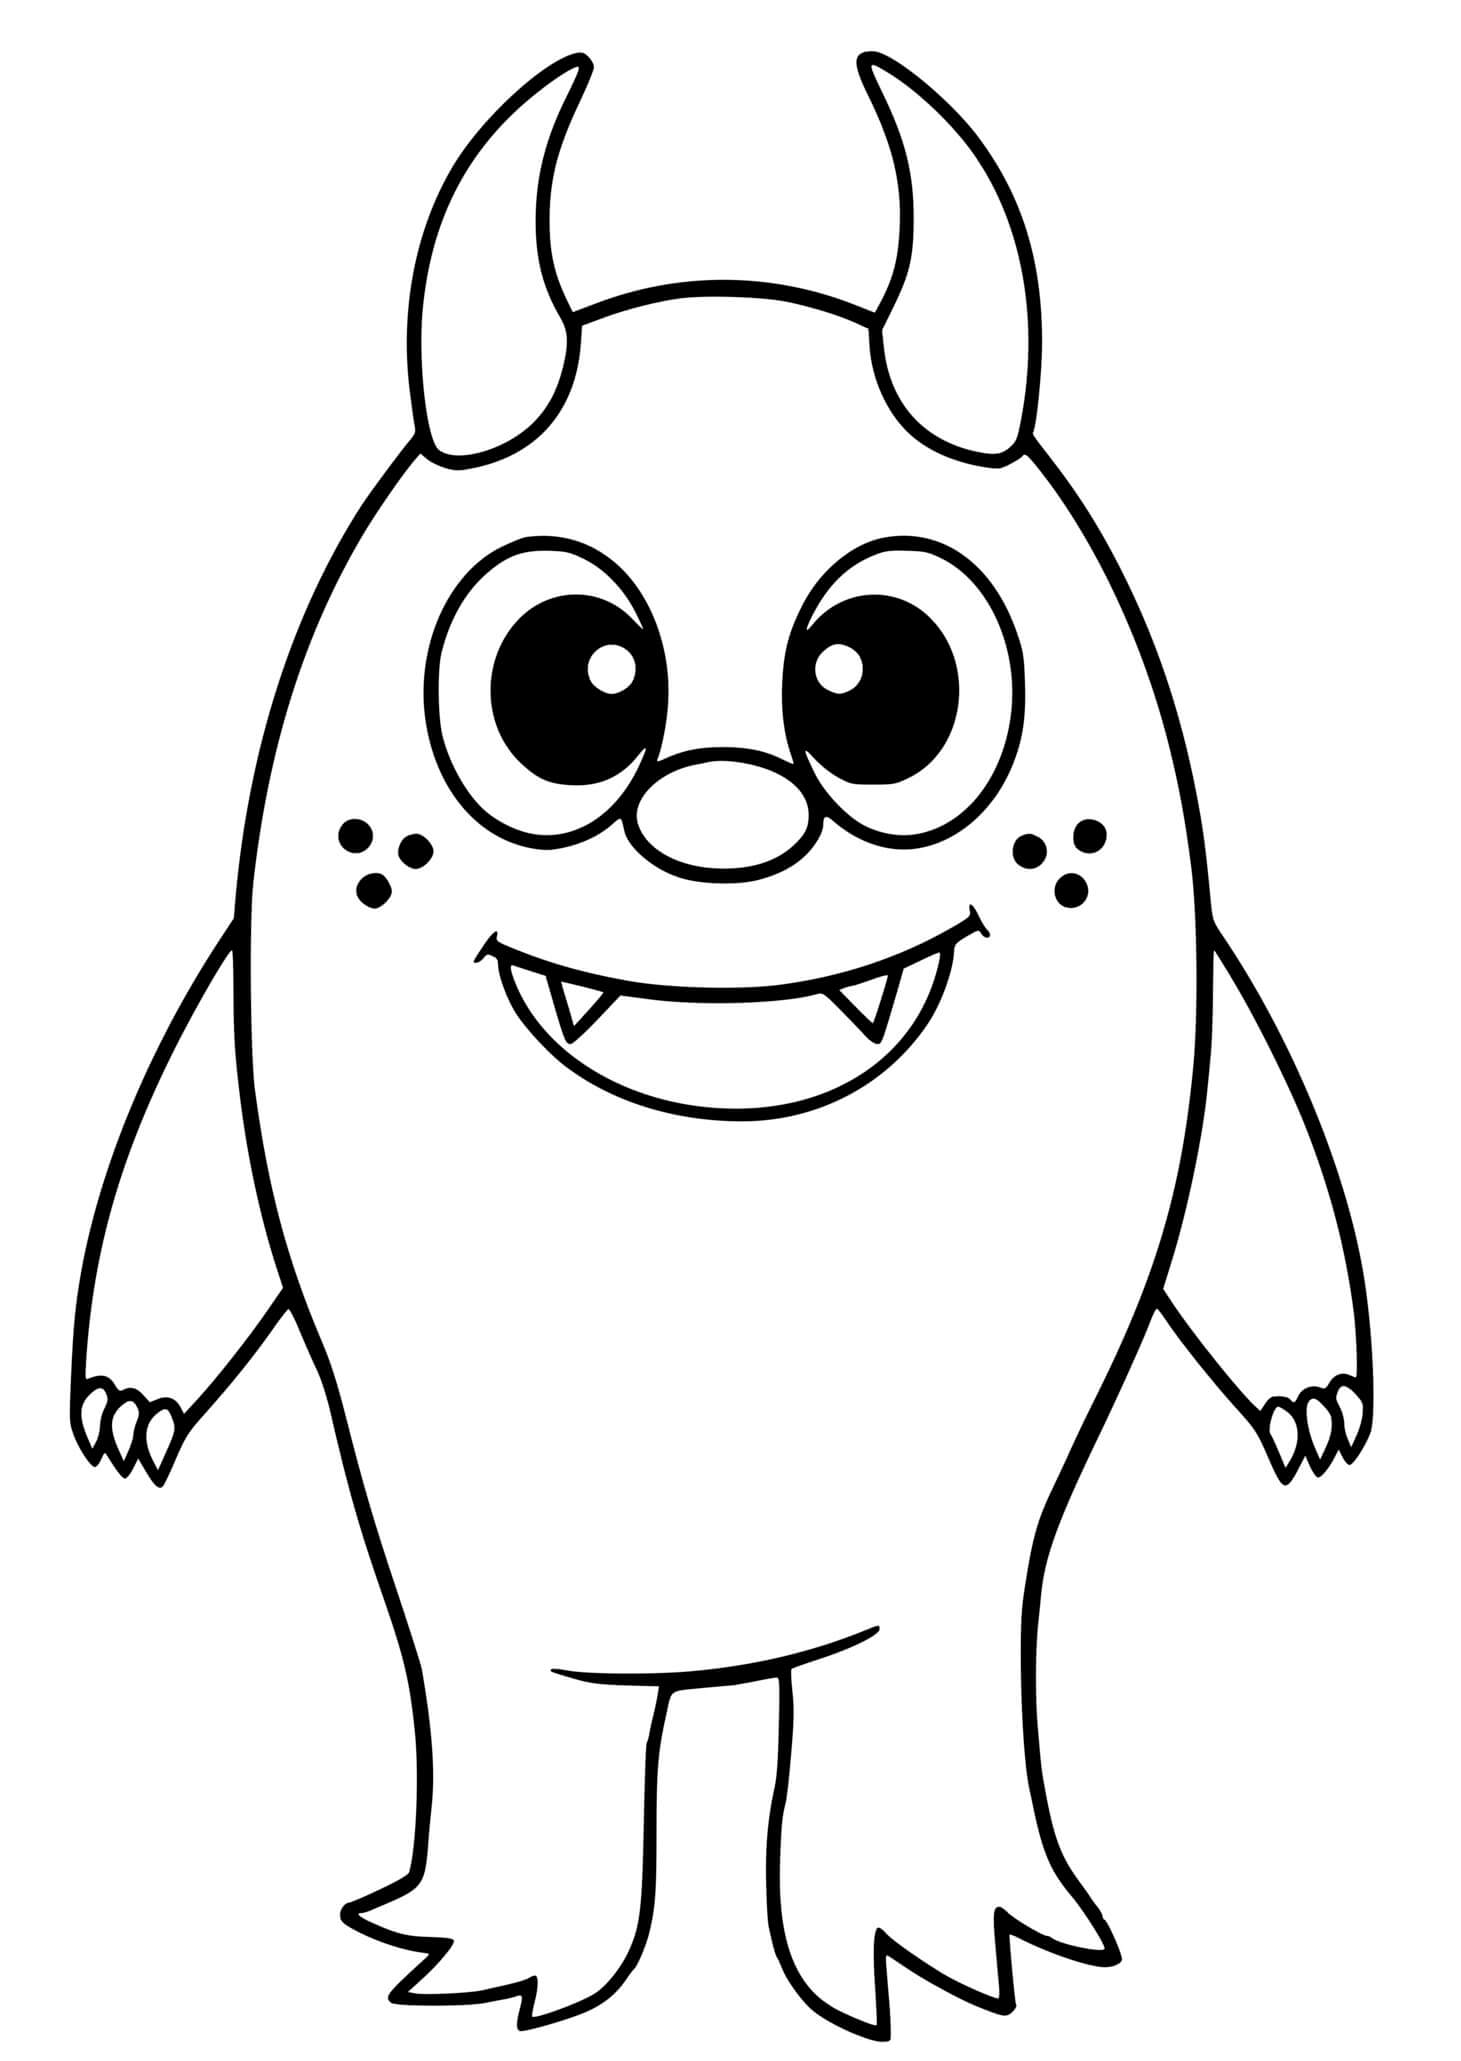 Cute Kid Monster Coloring Pages - Coloring Cool